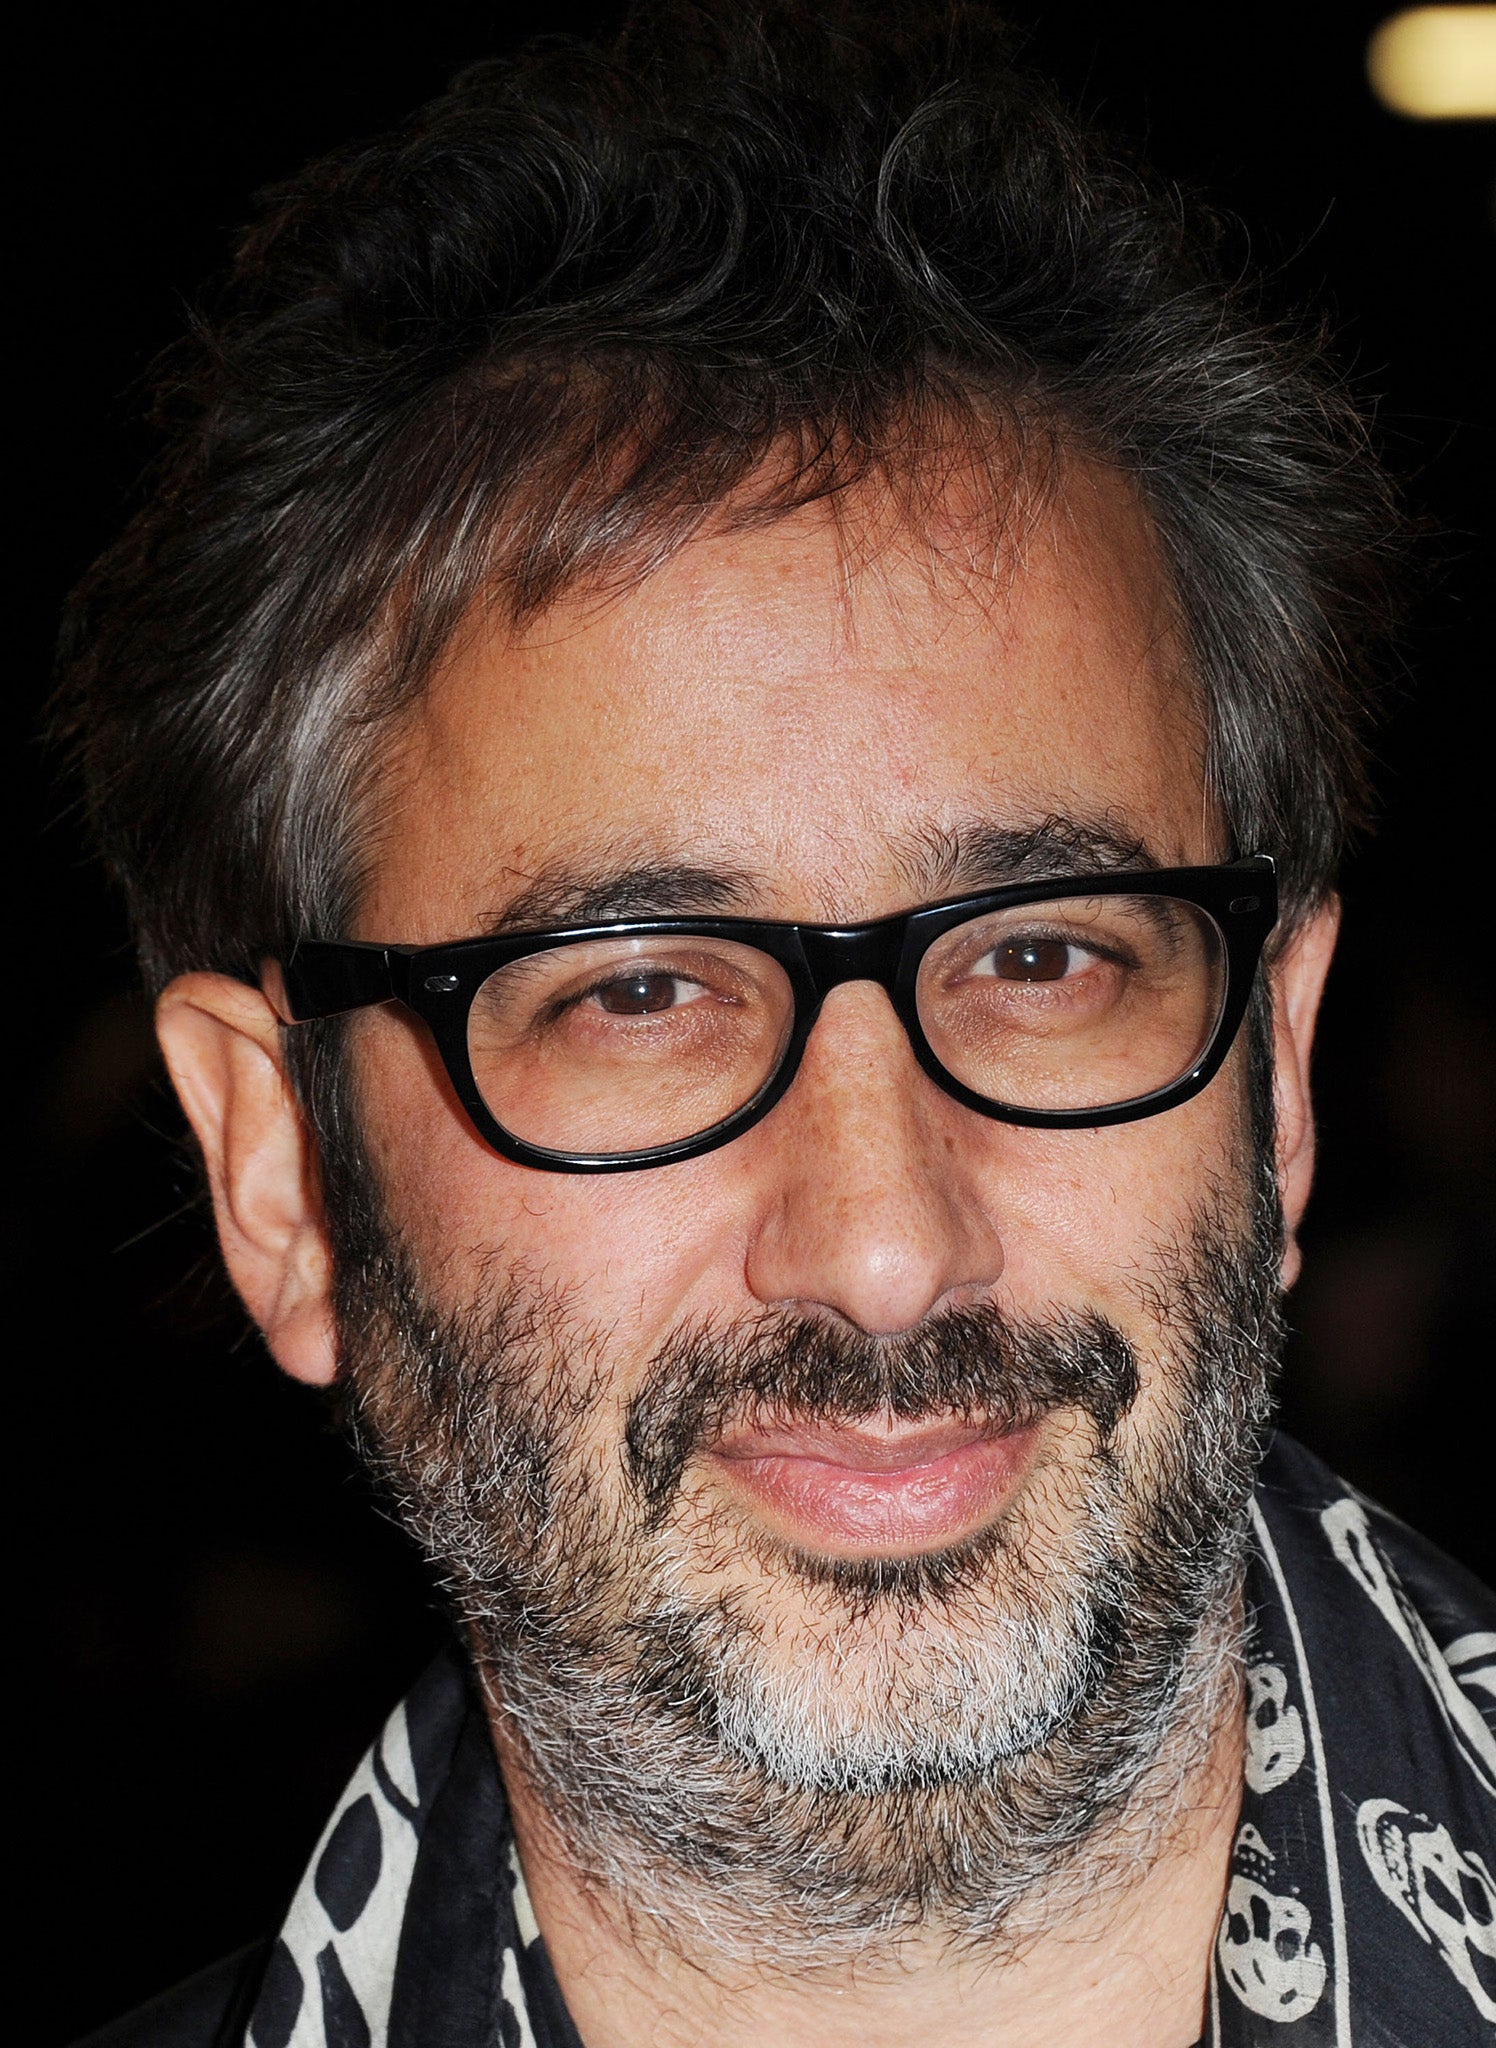 Standing up to be counted: David Baddiel has a new Edinburgh show